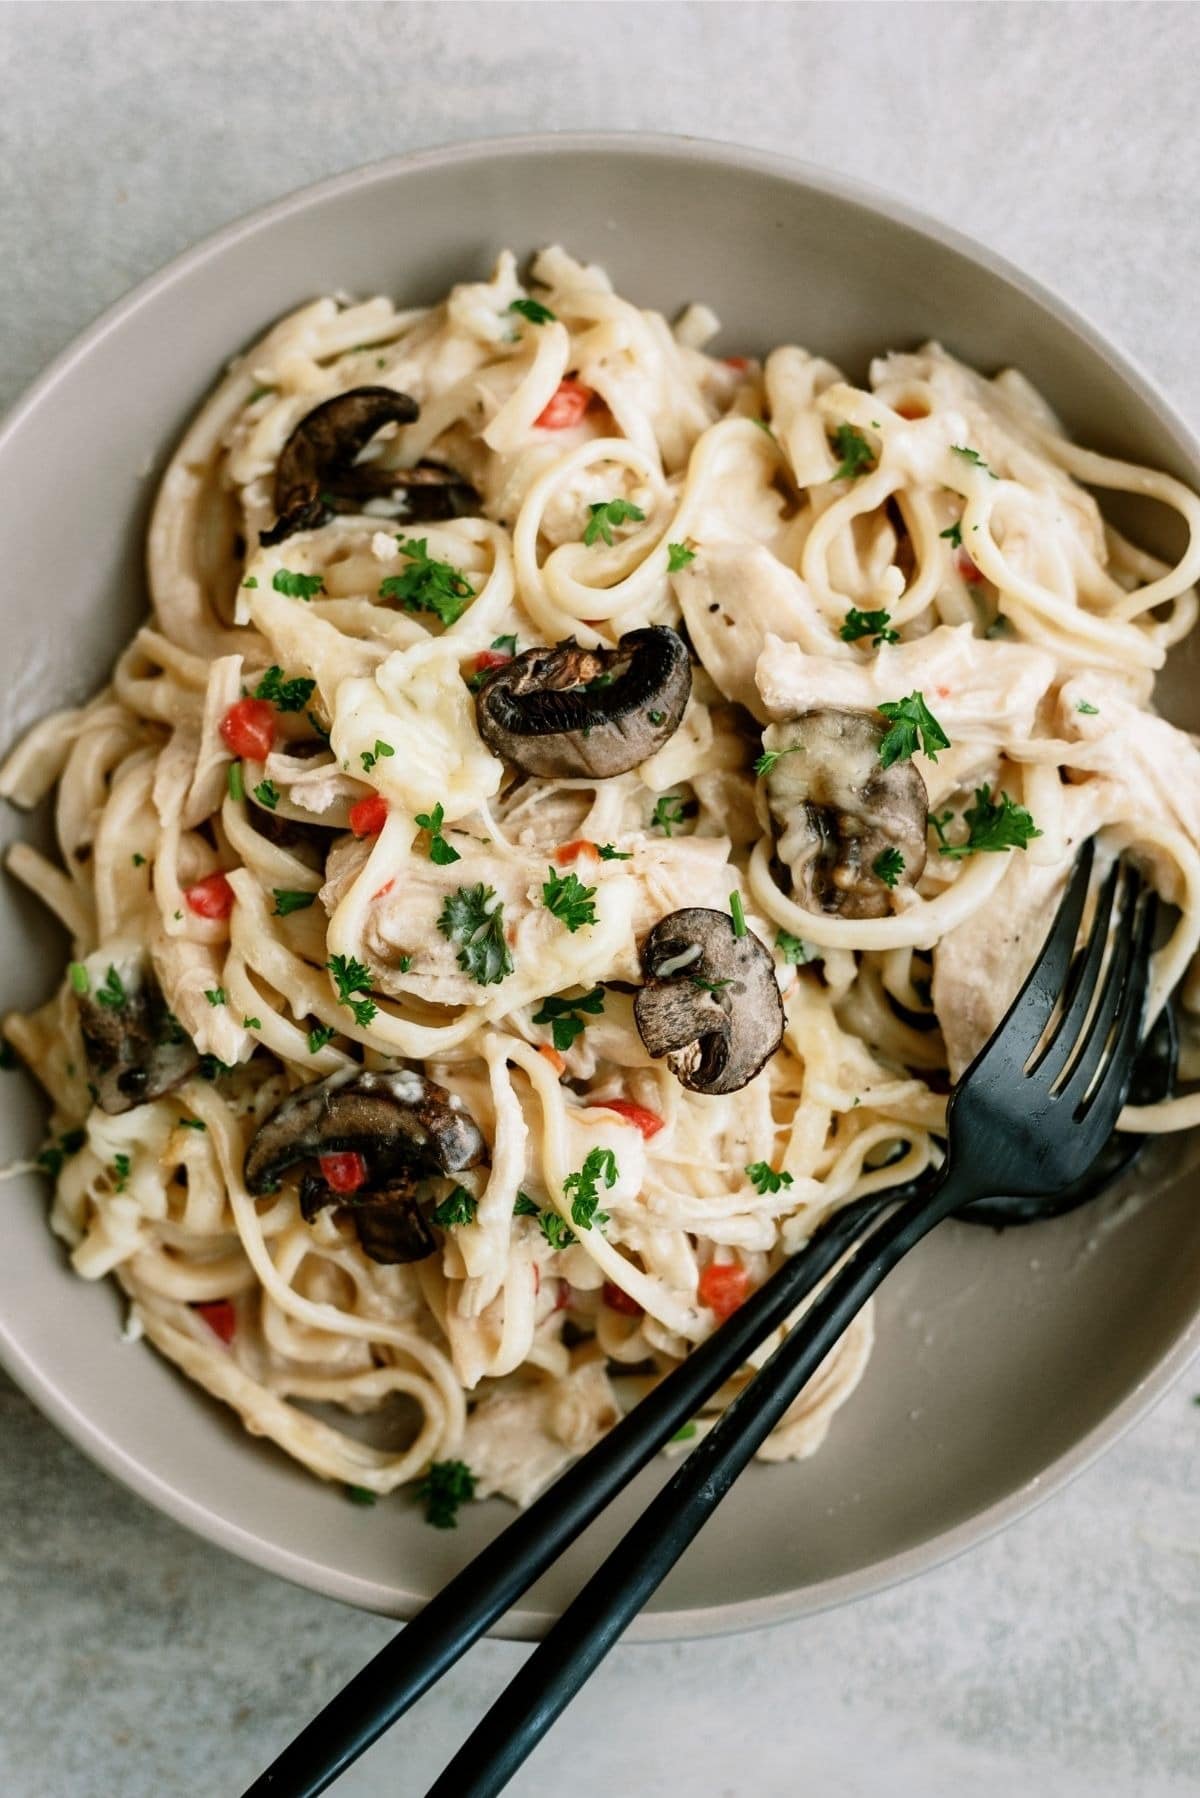 Pasta cooked with creamy sauce, mushroom, shredded chicken and chopped herbs served on a white plate. 